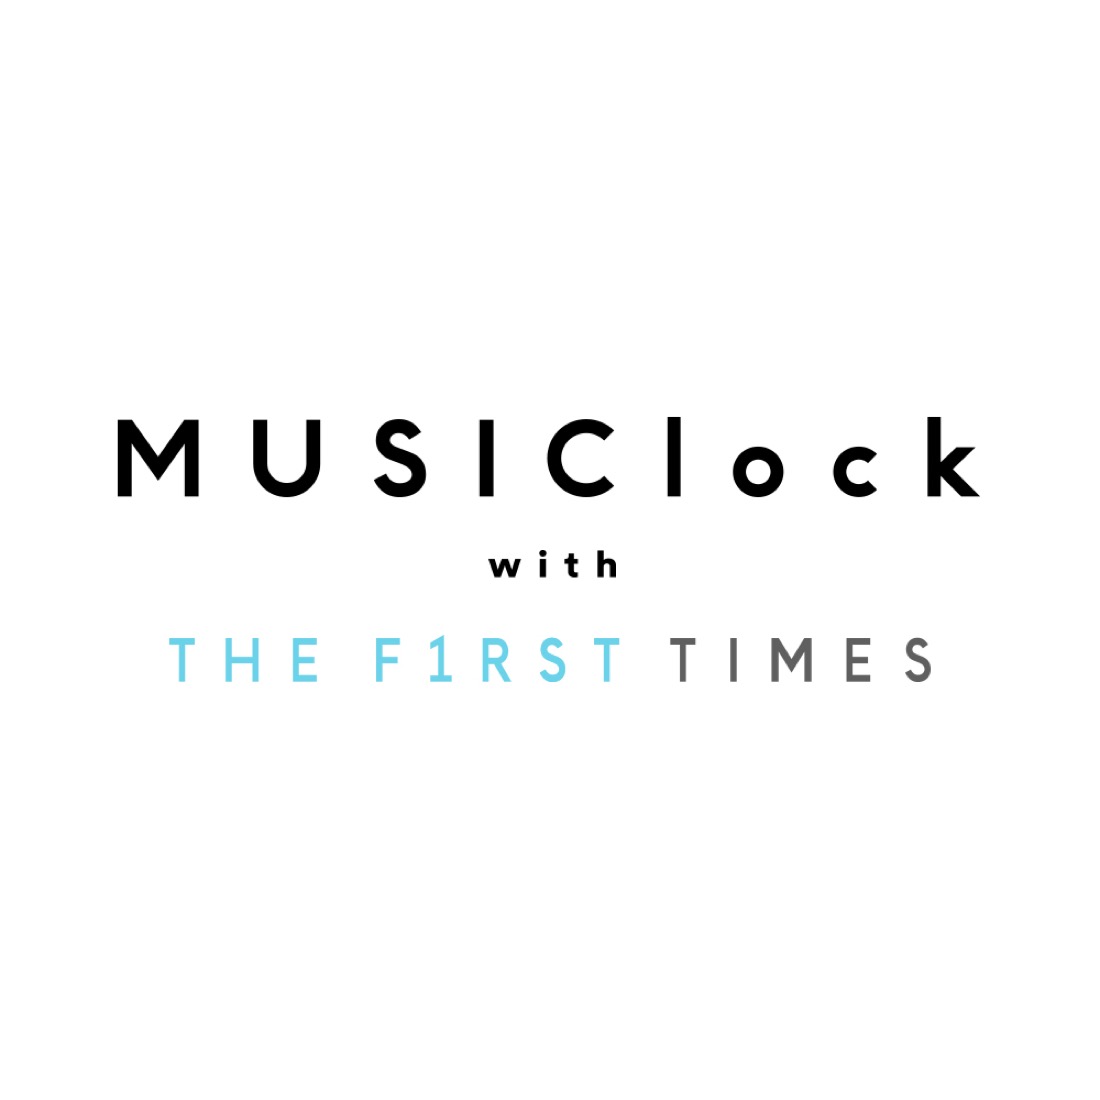 interFM『MUSIClock with THE FIRST TIMES』が“朝のバラエティ番組”としてリニューアル！